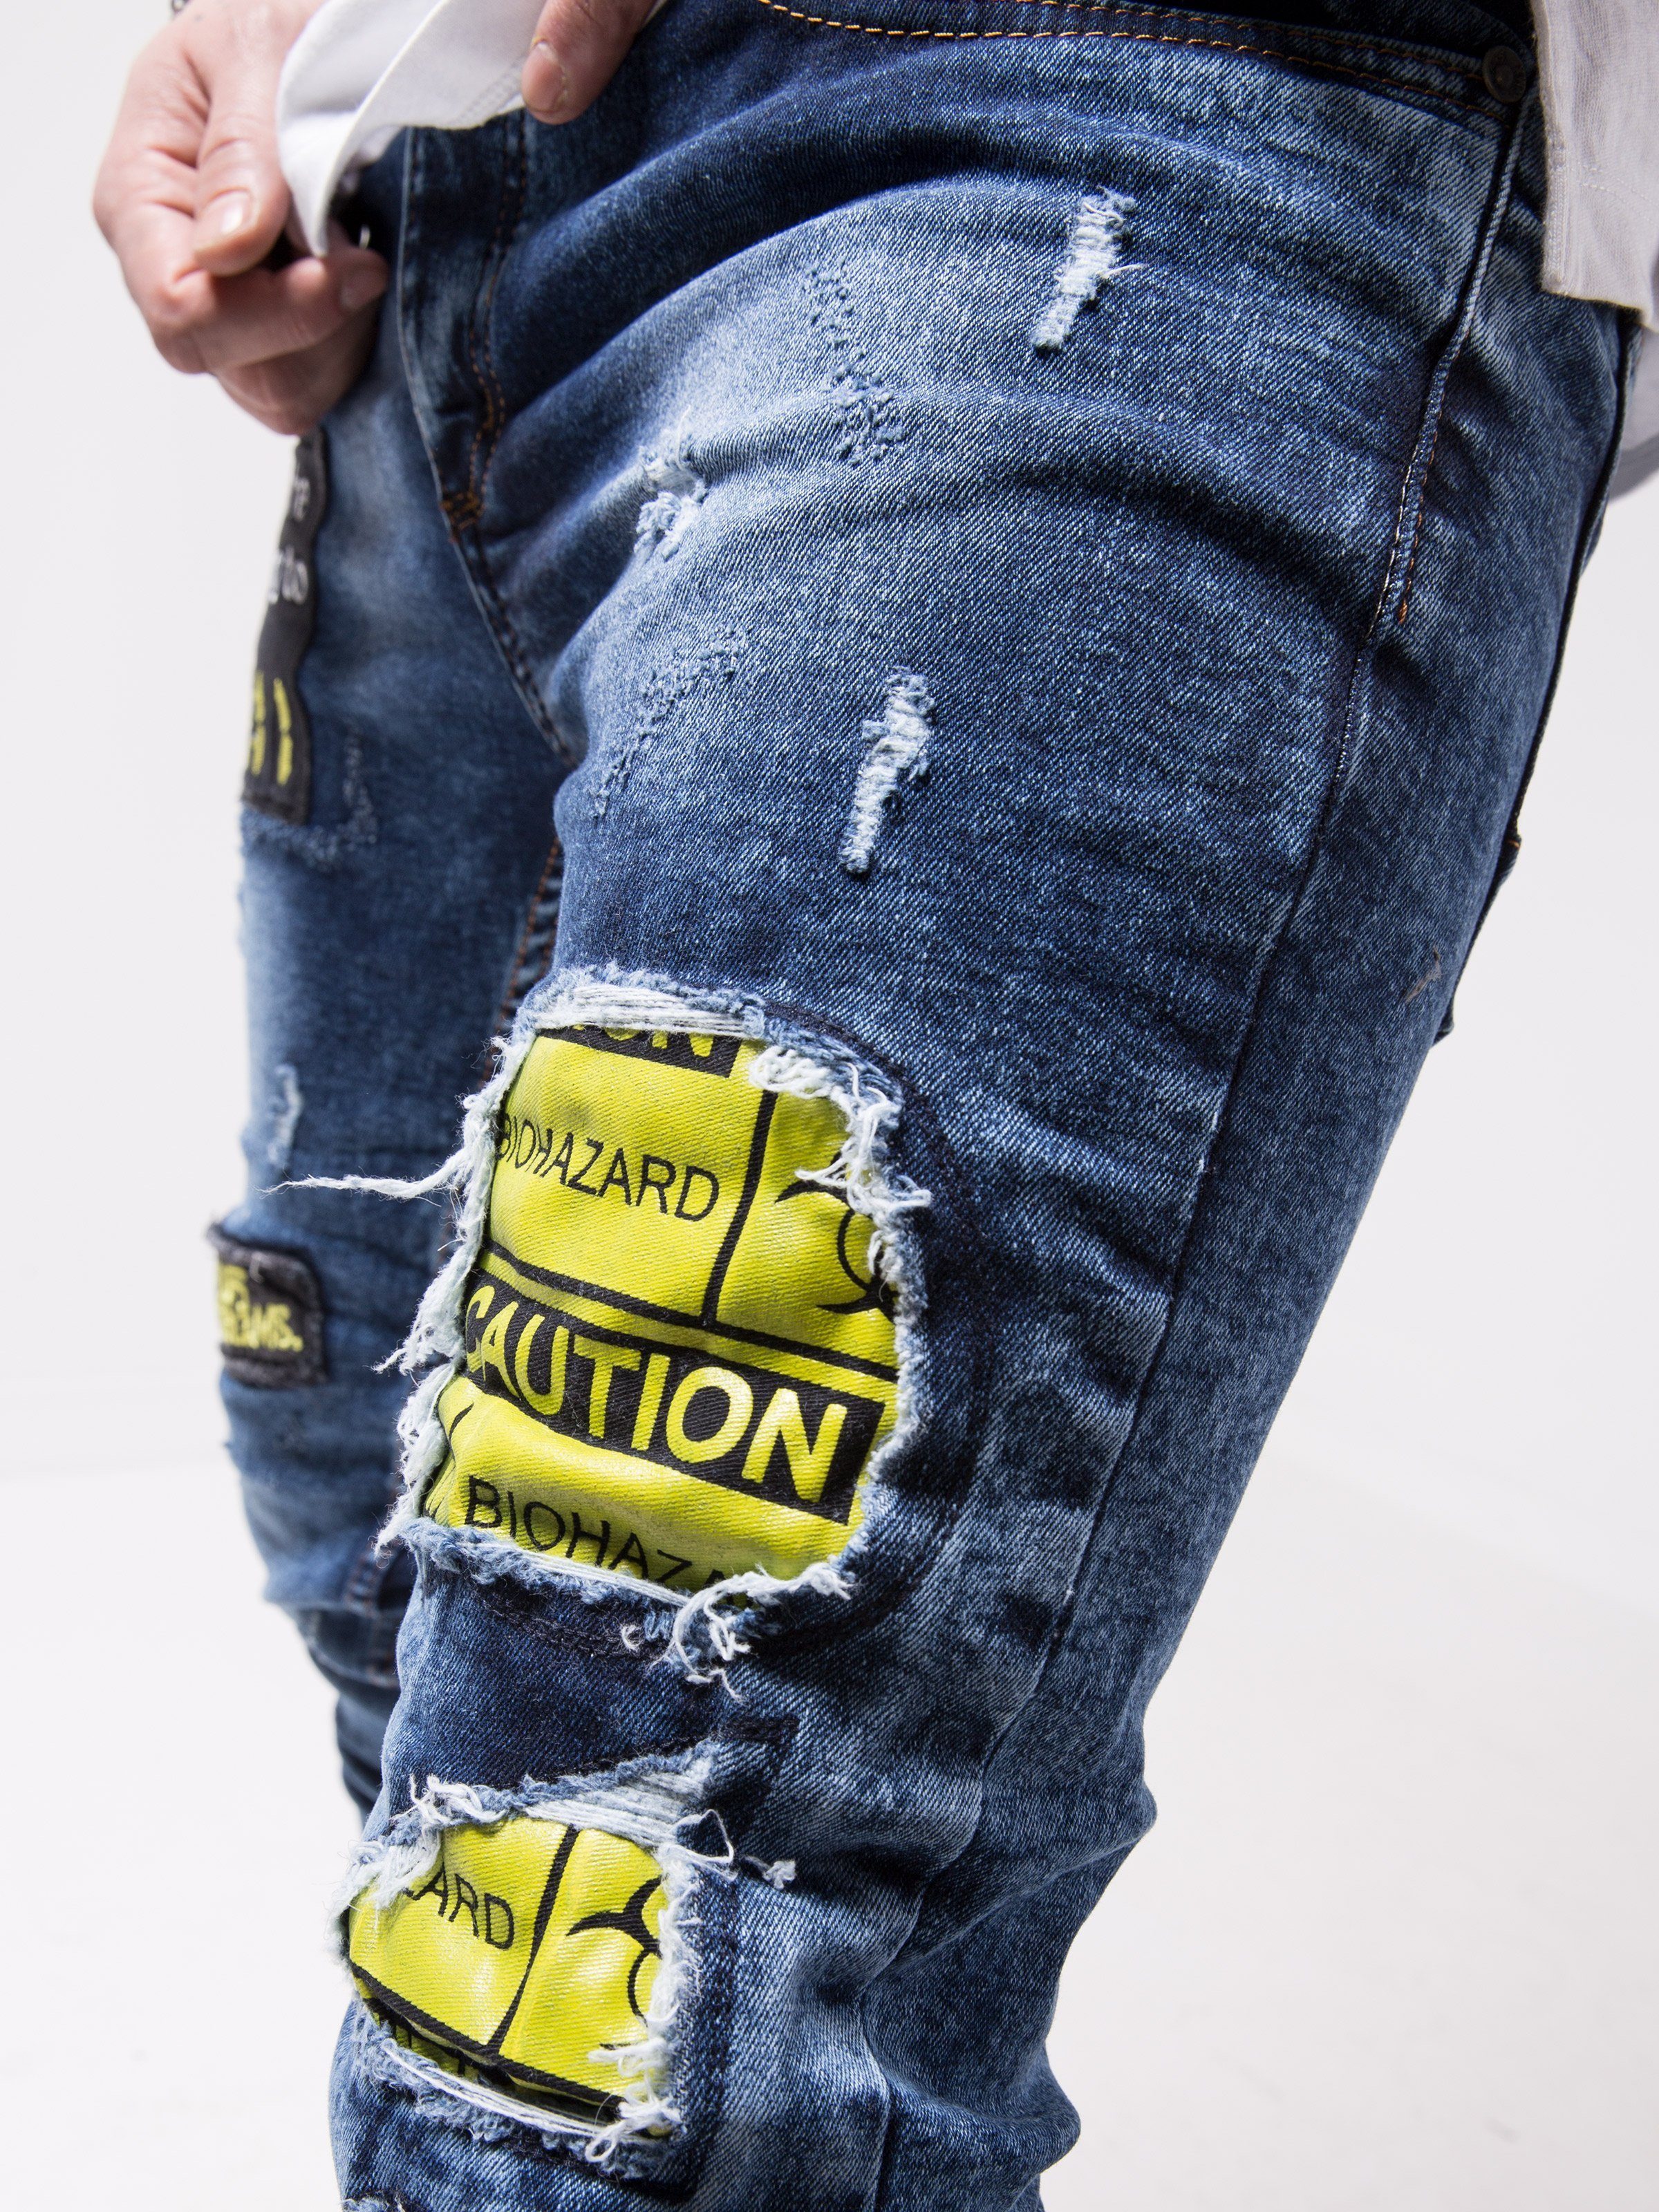 A man wearing ripped jeans with yellow patches, MOUNT EVEREST.